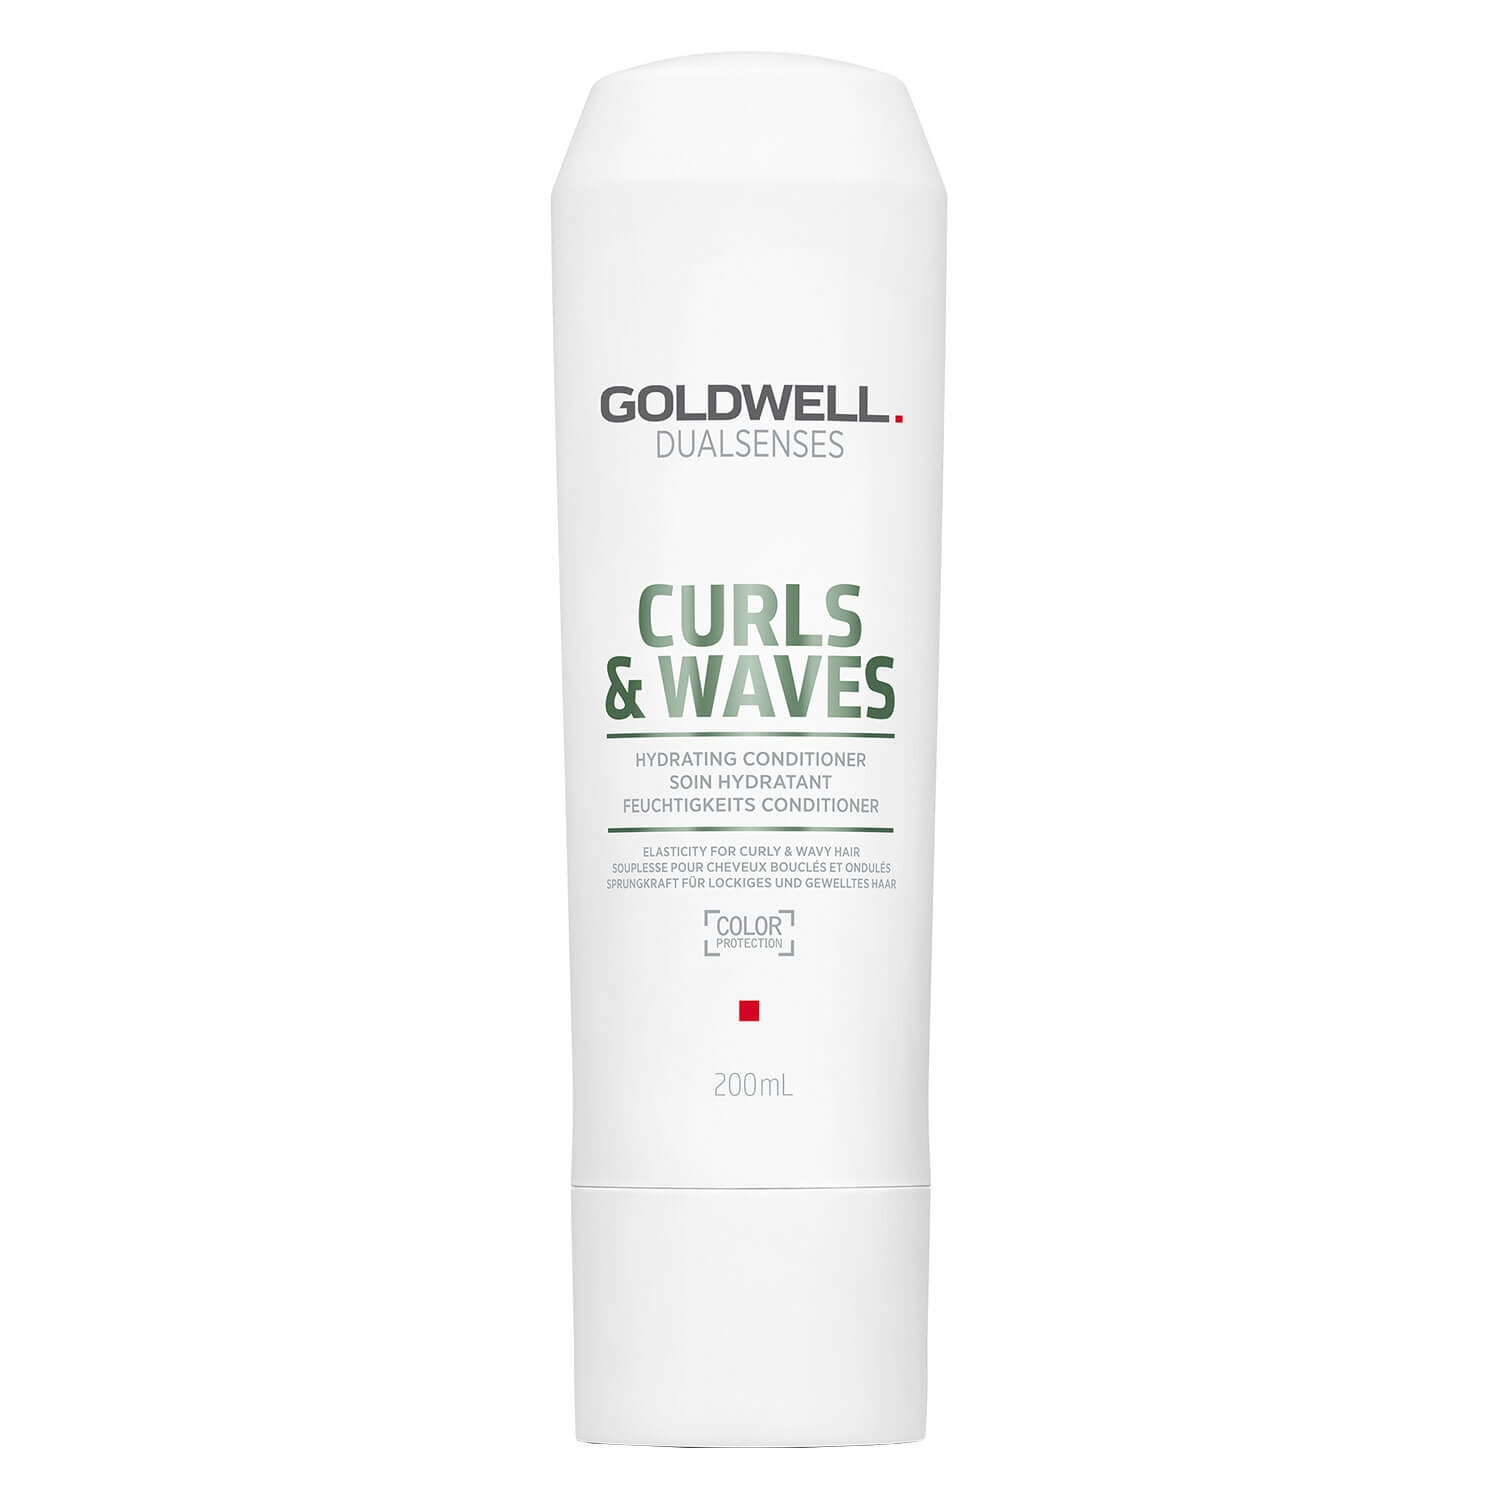 Product image from Dualsenses Curls & Waves - Hydrating Conditioner